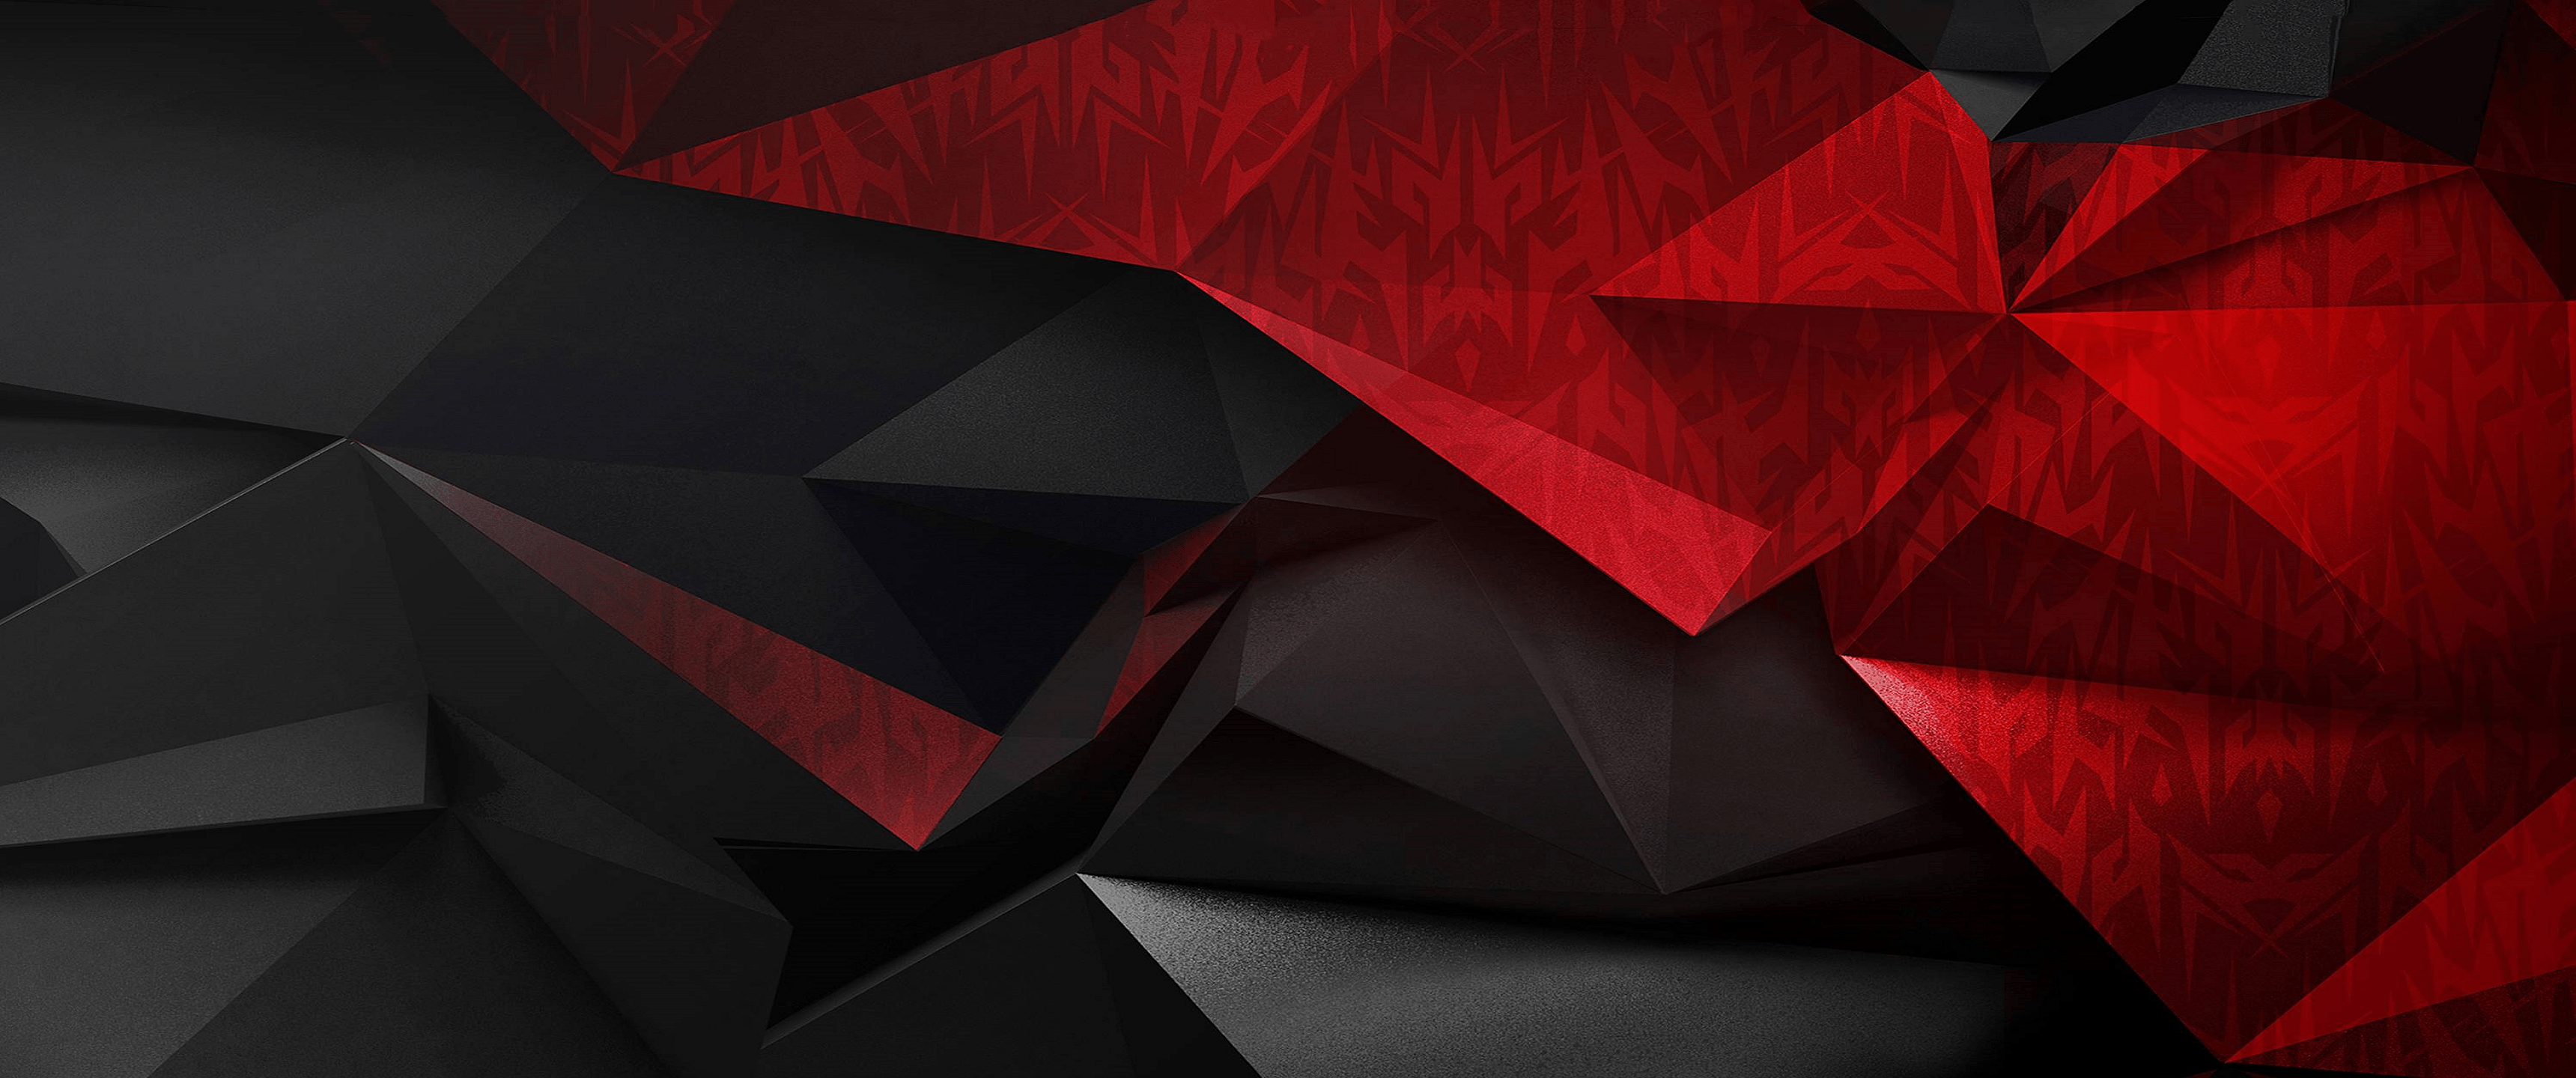 Anyone have the official Acer Predator 3440x1440 wallpaper